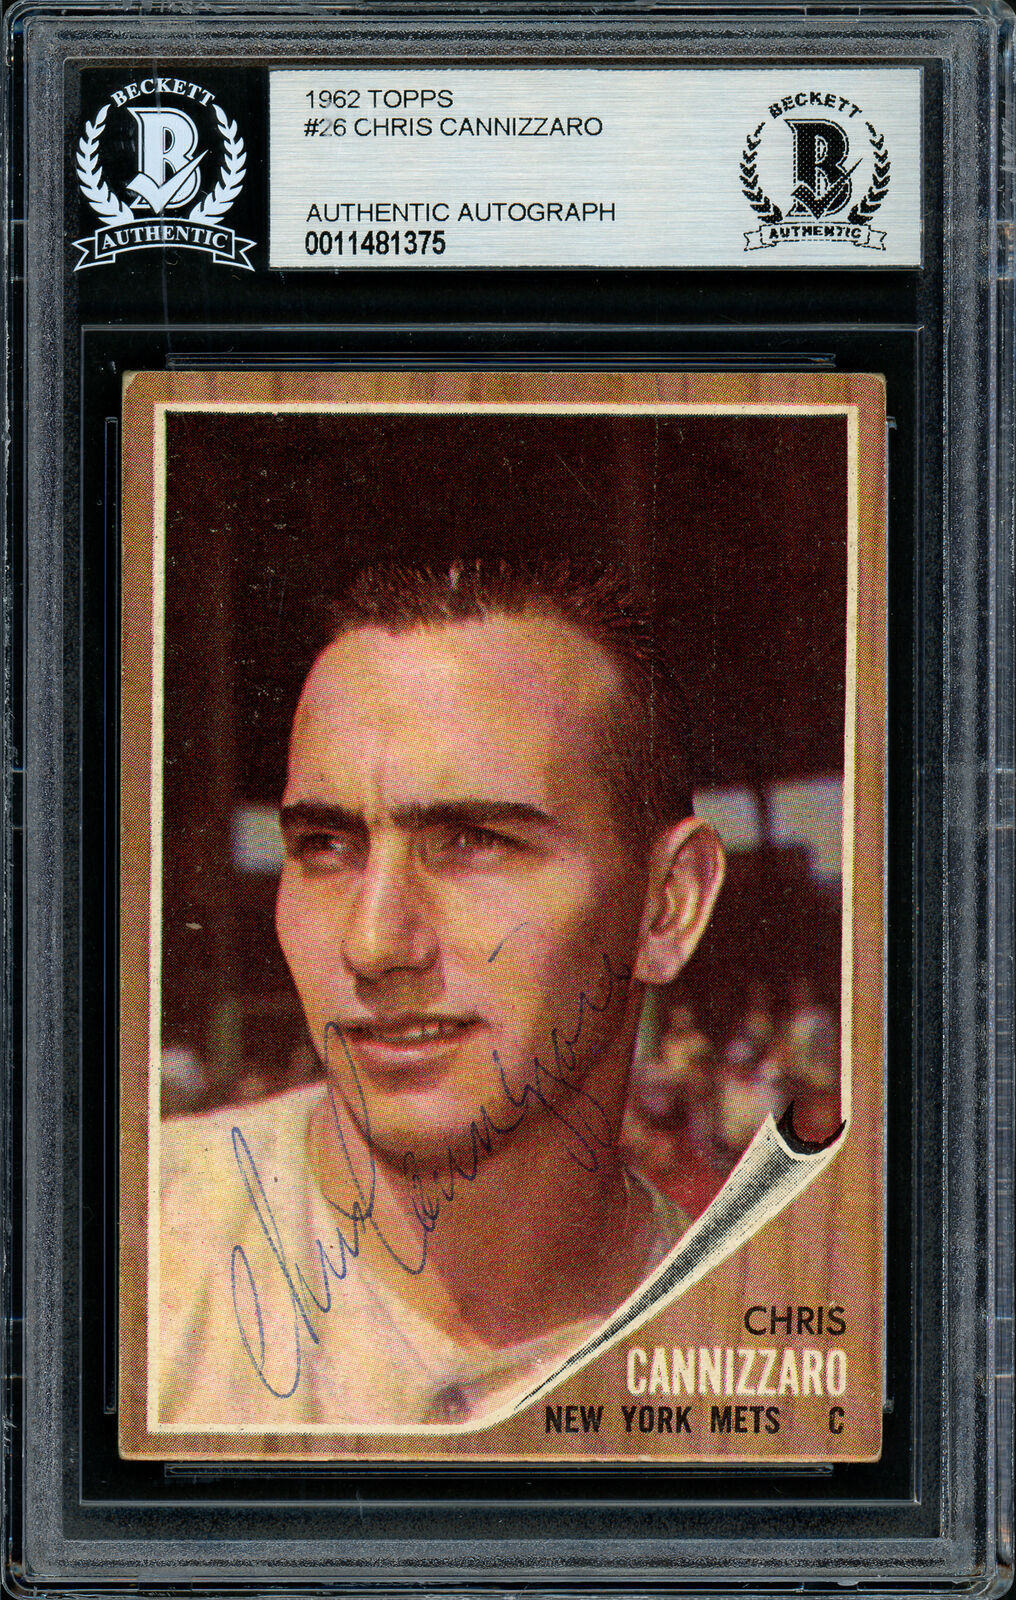 Chris Cannizzaro Autographed Signed 1962 Topps Card #26 Mets Beckett 11481375 Image 4